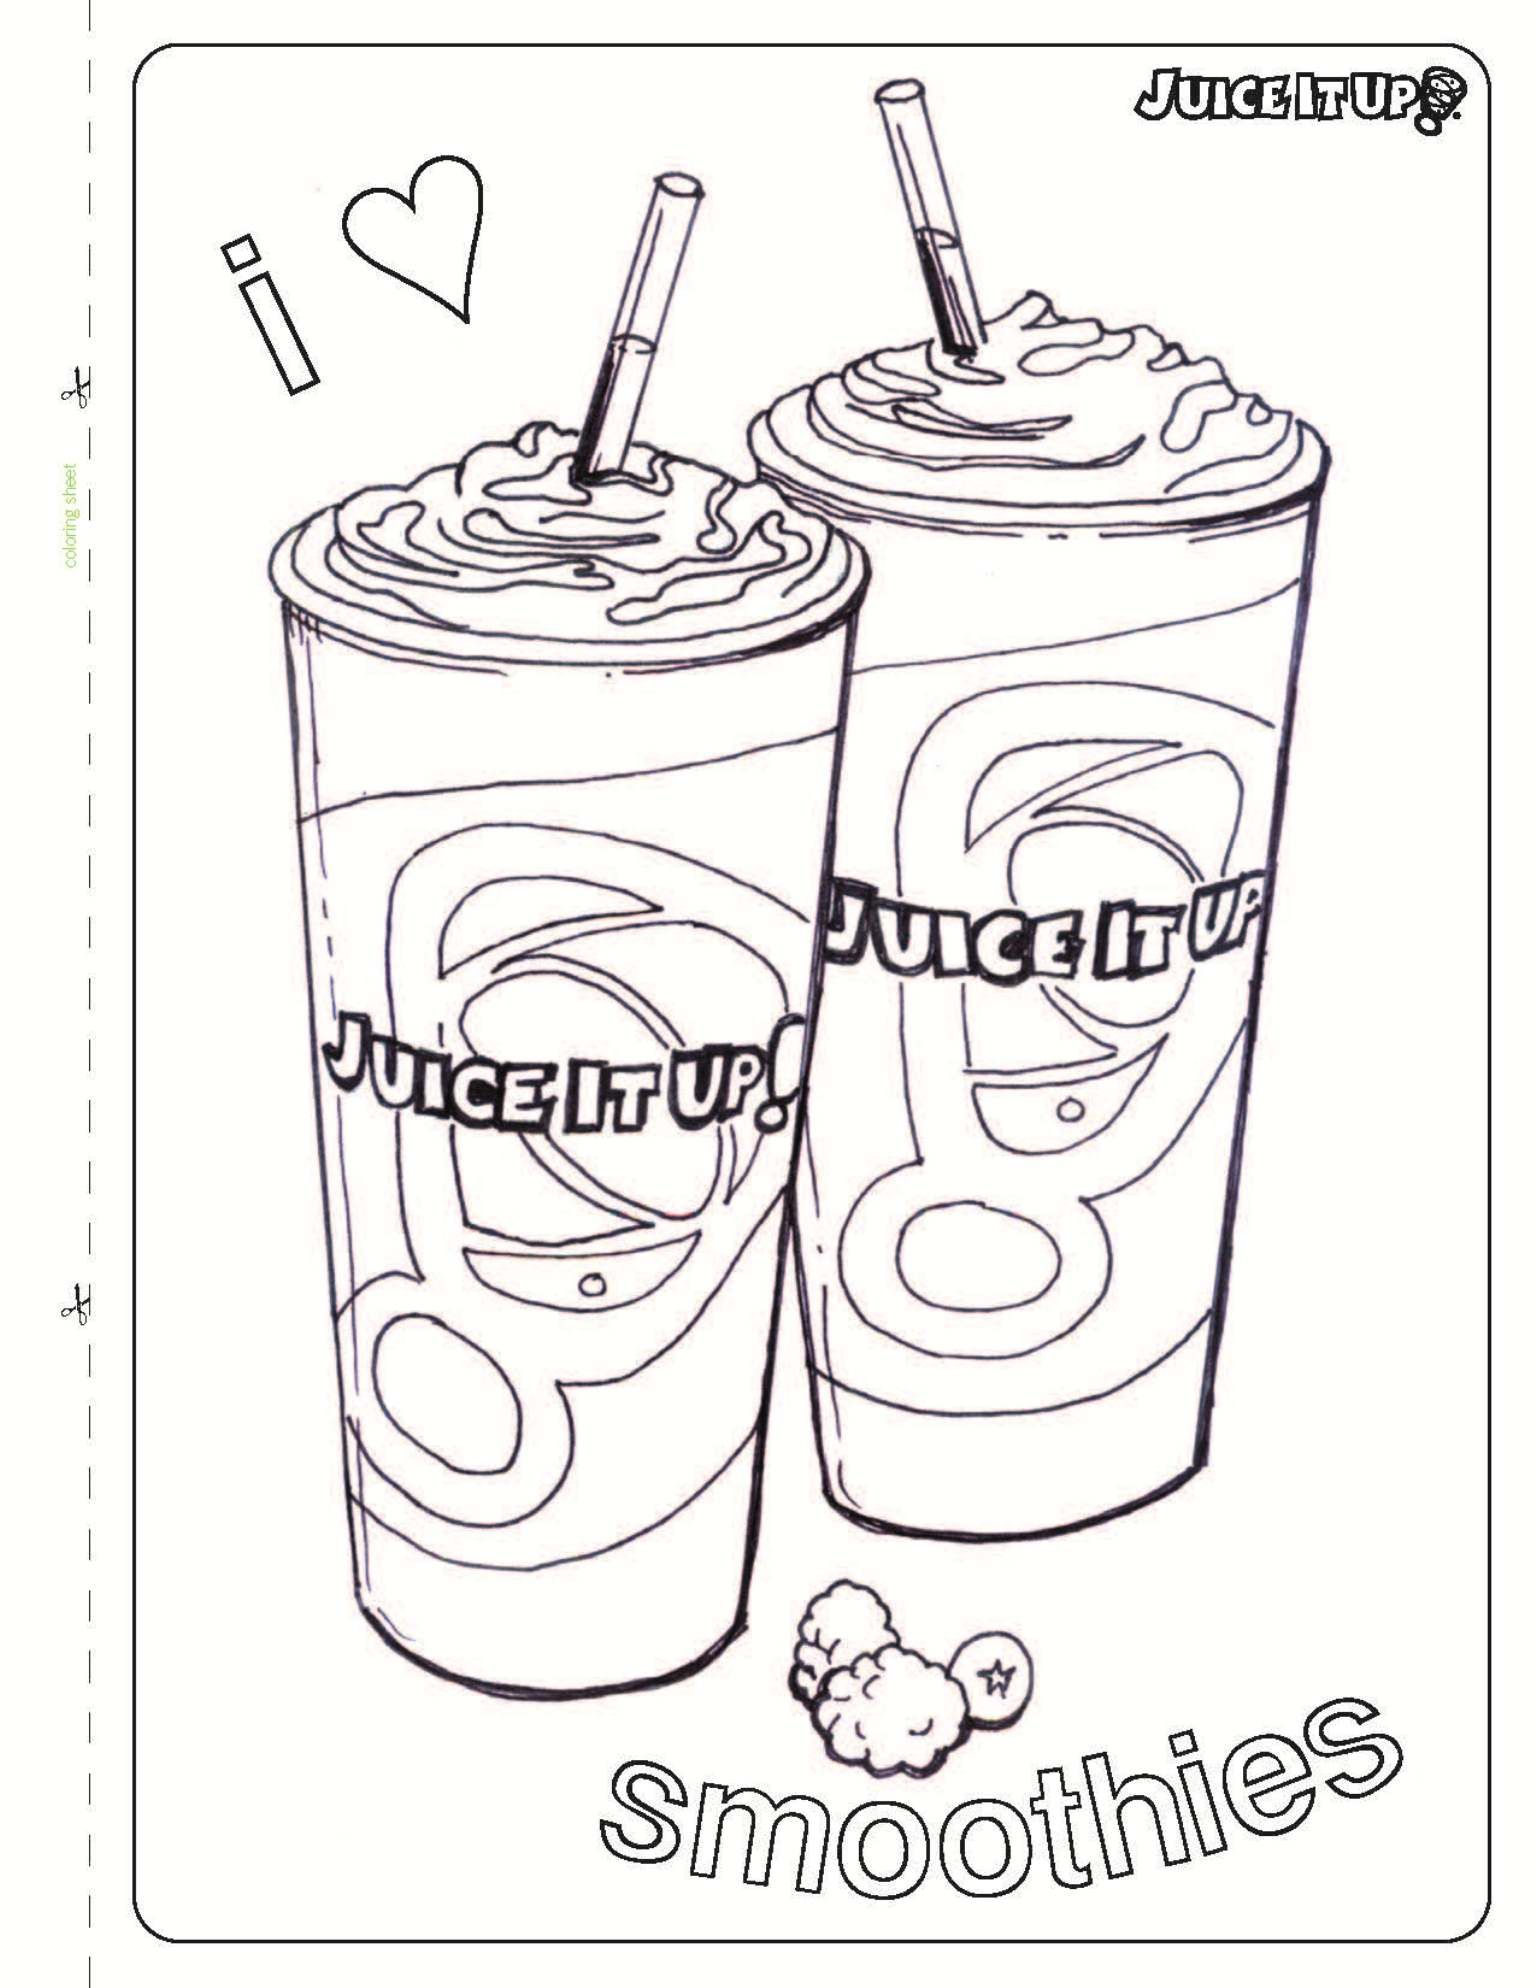 Juice it up kids coloring sheets